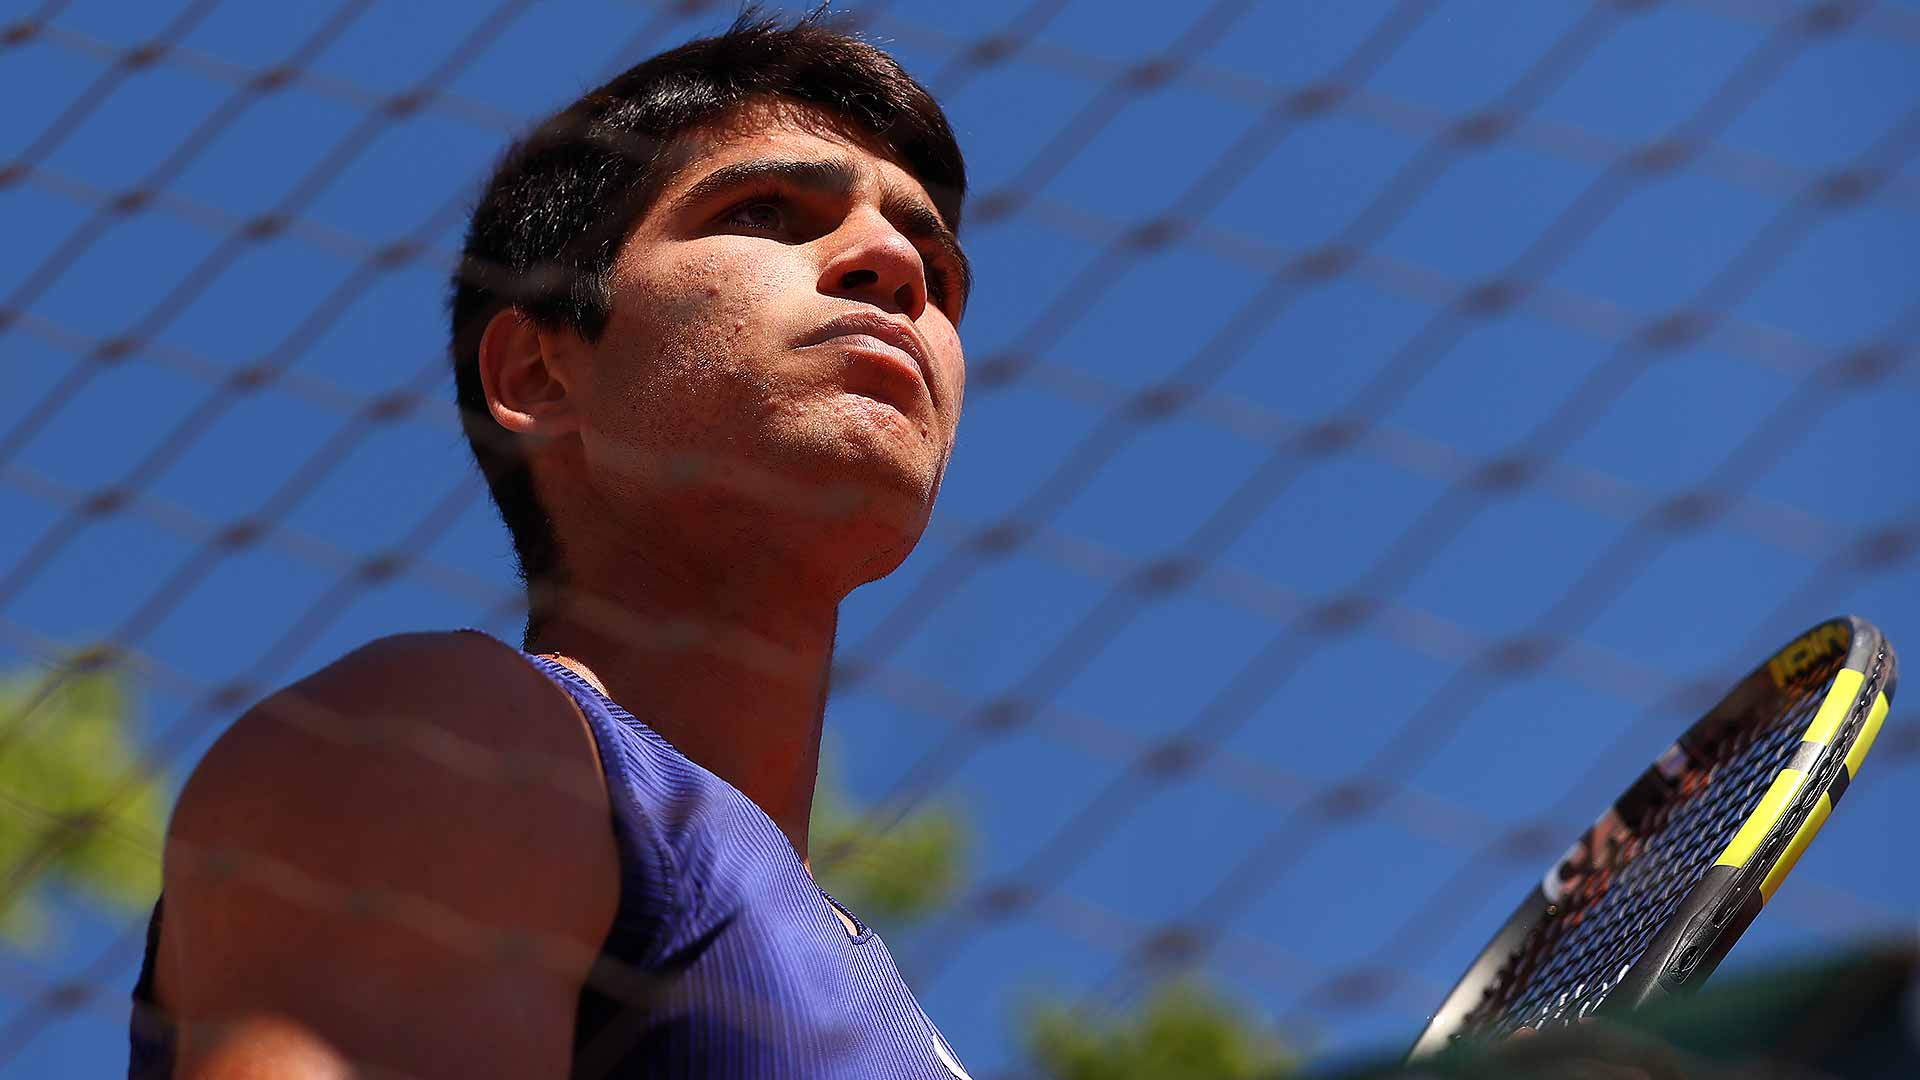 At 18, Carlos Alcaraz is already entrenched in the Top 100 of the FedEx ATP Rankings.